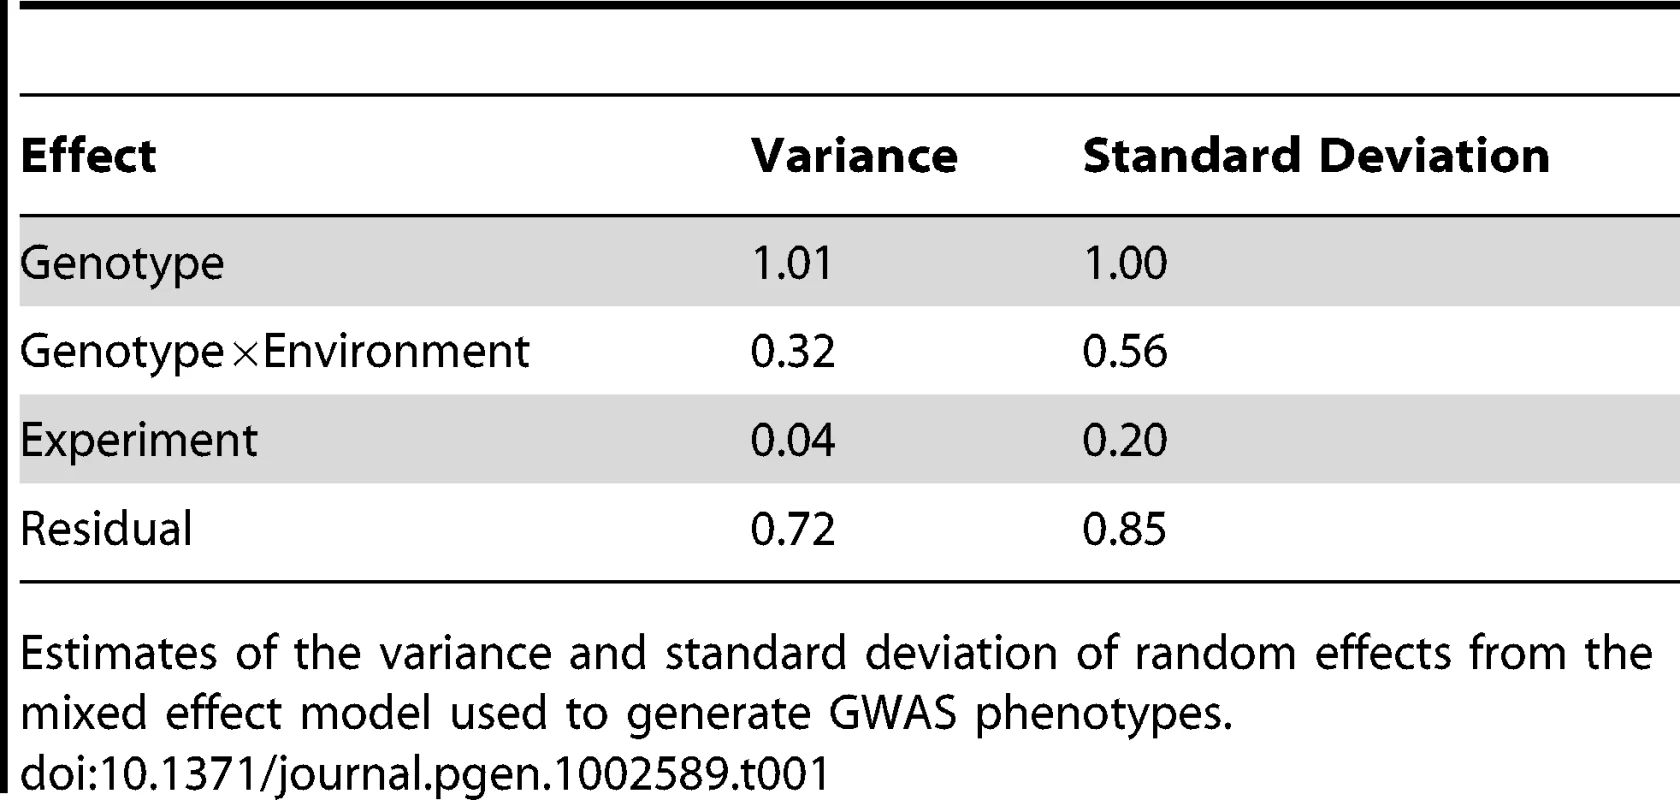 Parameters from the phenotype mixed effects model.